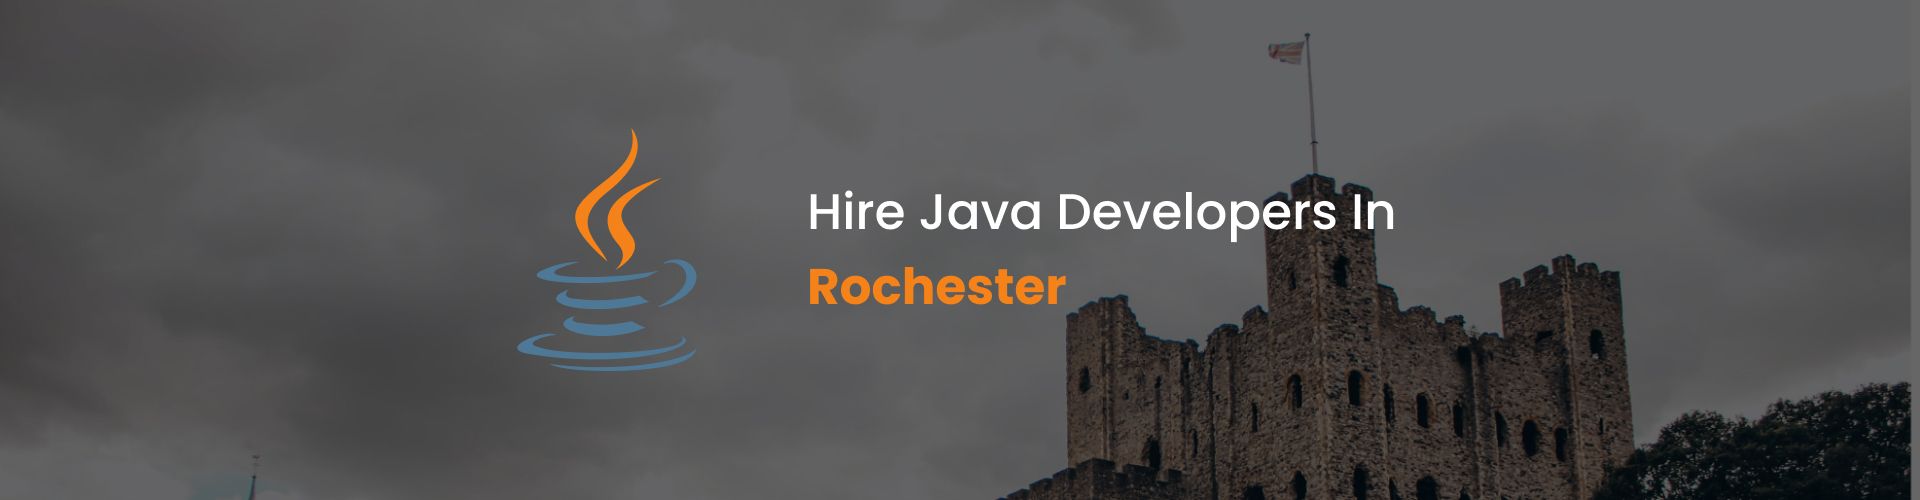 hire java developers in rochester